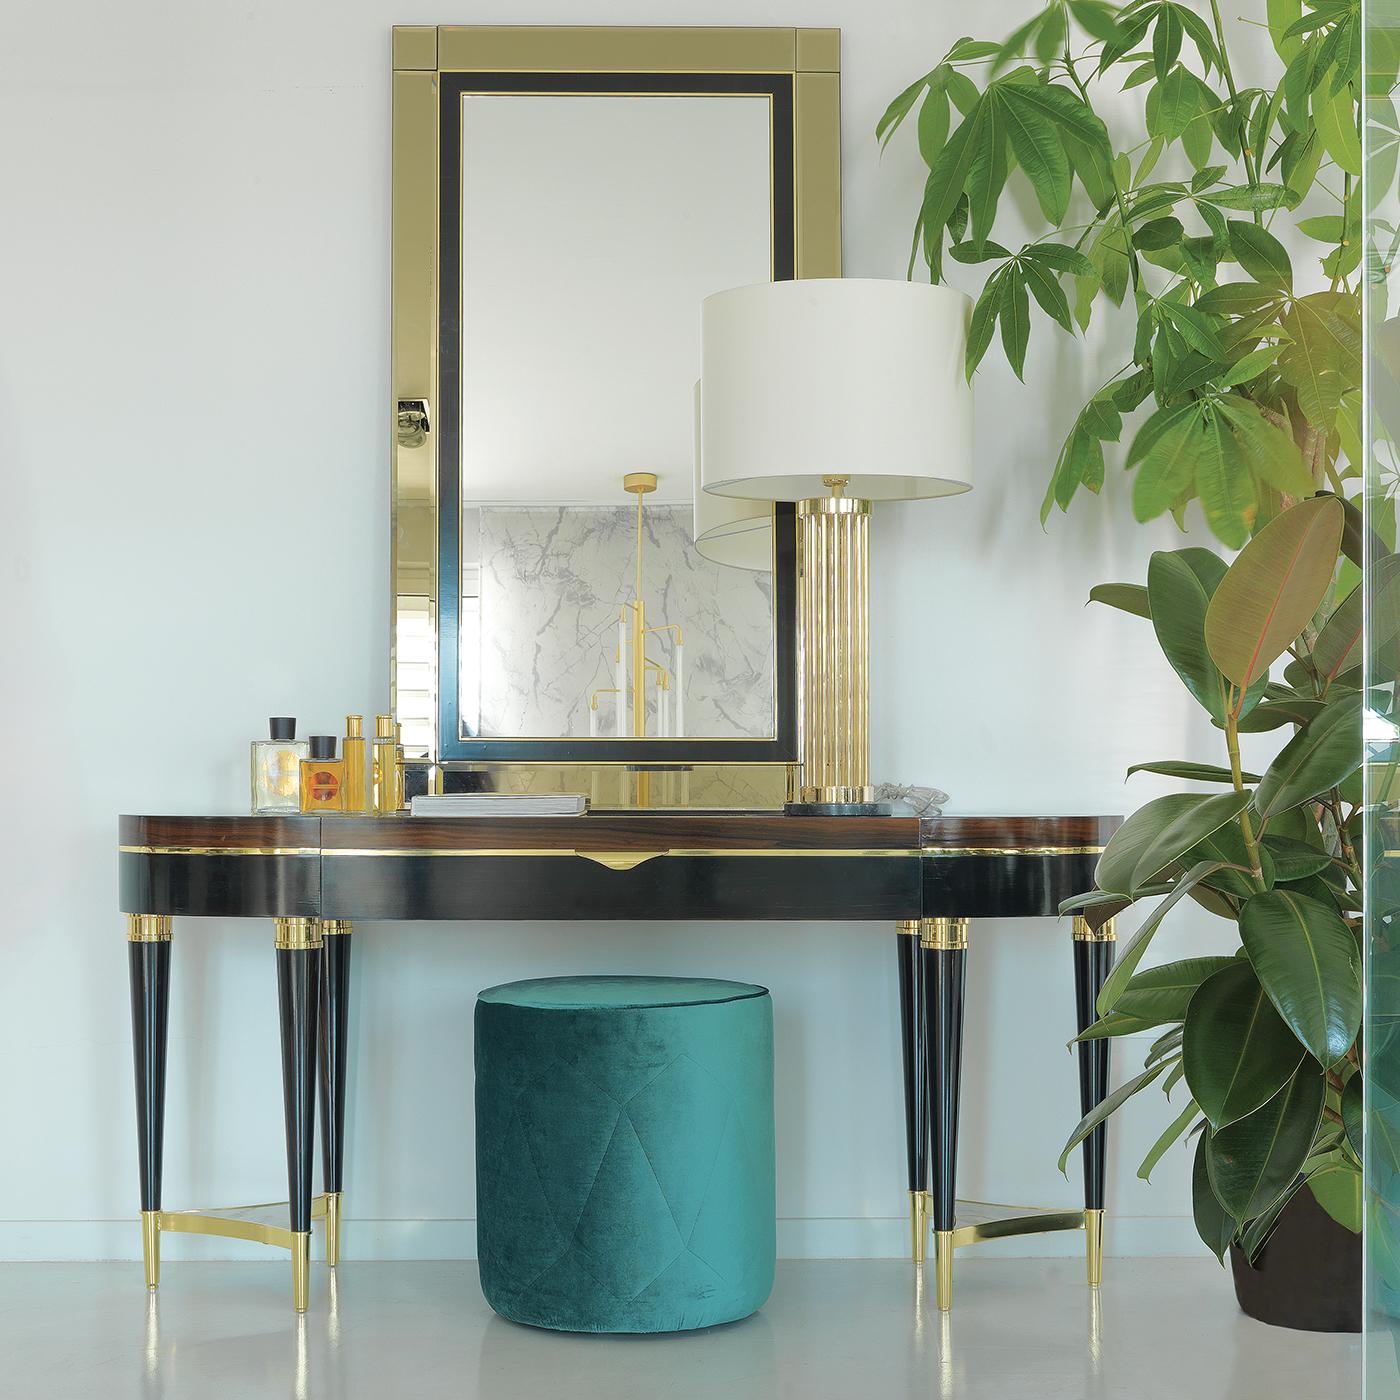 Part of a collection of exquisite furniture pieces made of ebony and boasting a bold character and timeless sophistication, this console features six legs painted in dark ebony, combined three by three, and connected with an insert in Corteccia